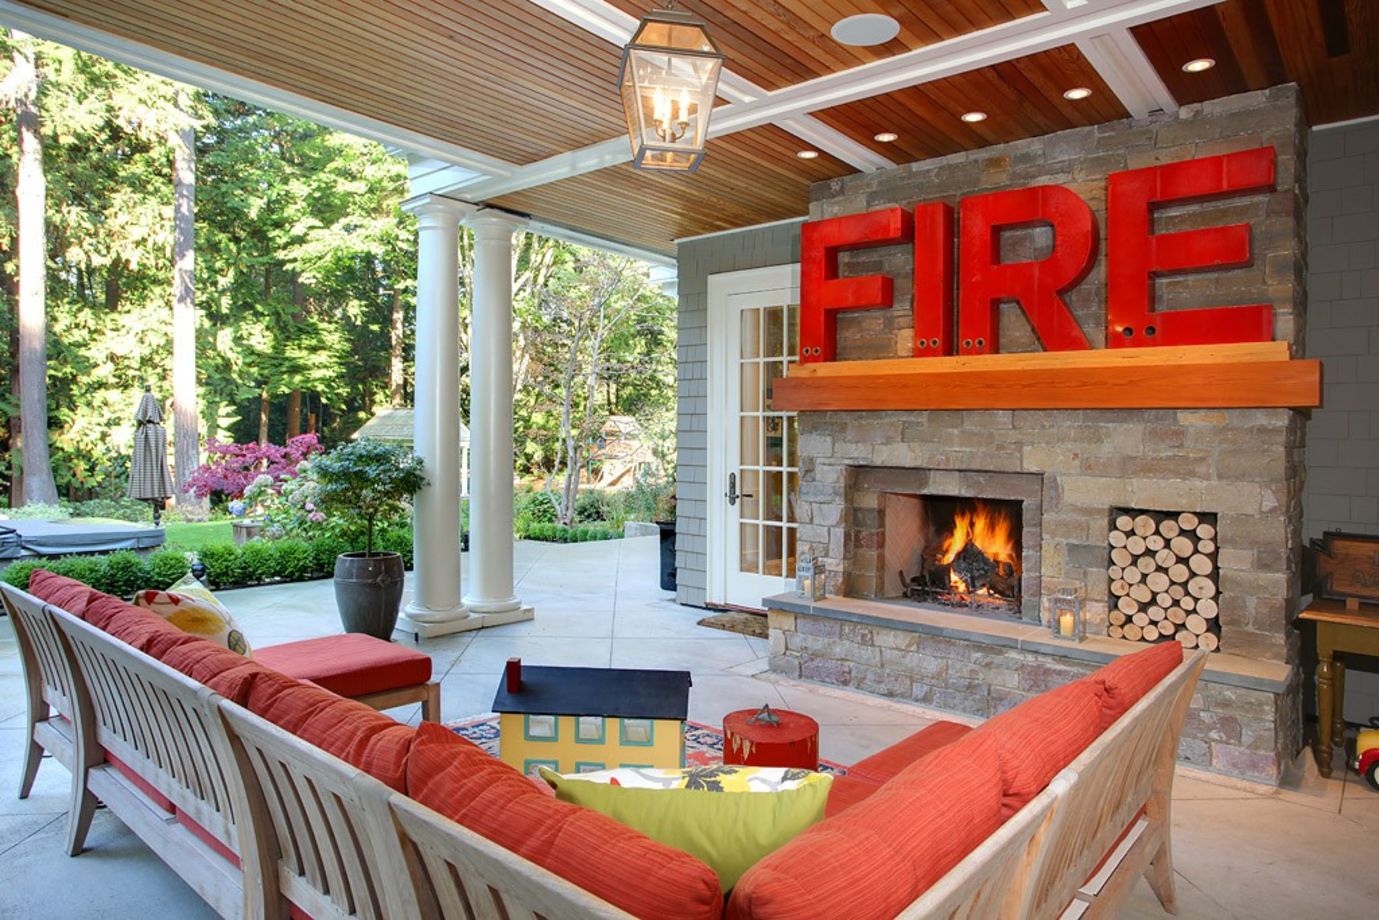 Outdoor Living 8 Ideas To Get The Most Out Of Your Space Porch